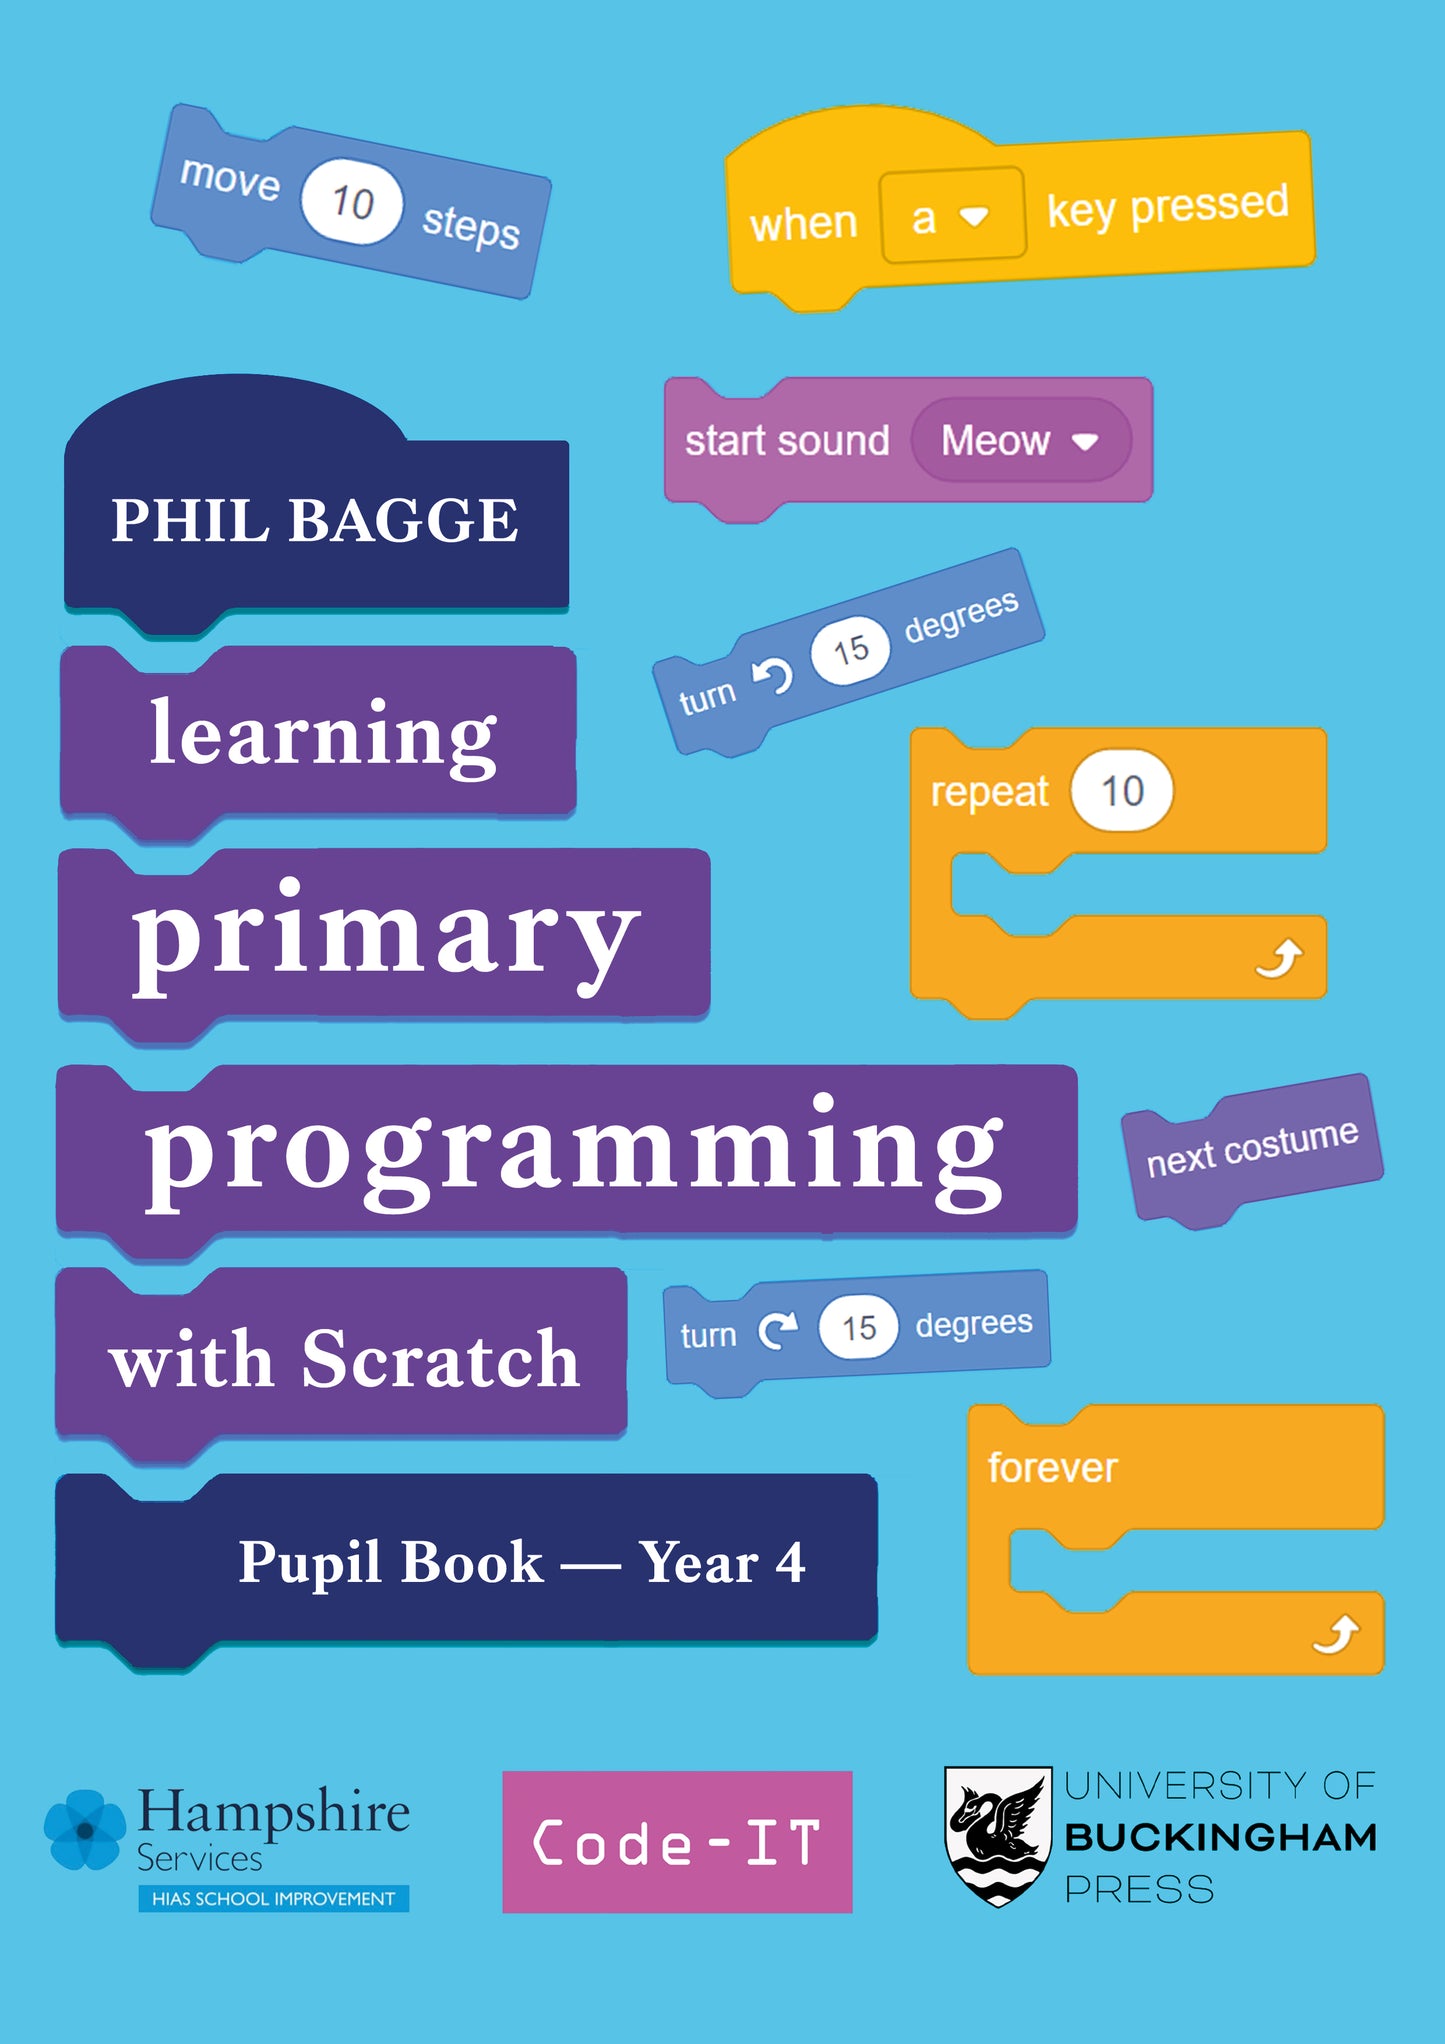 Teaching Primary Programming with Scratch Pupil Book Year 4